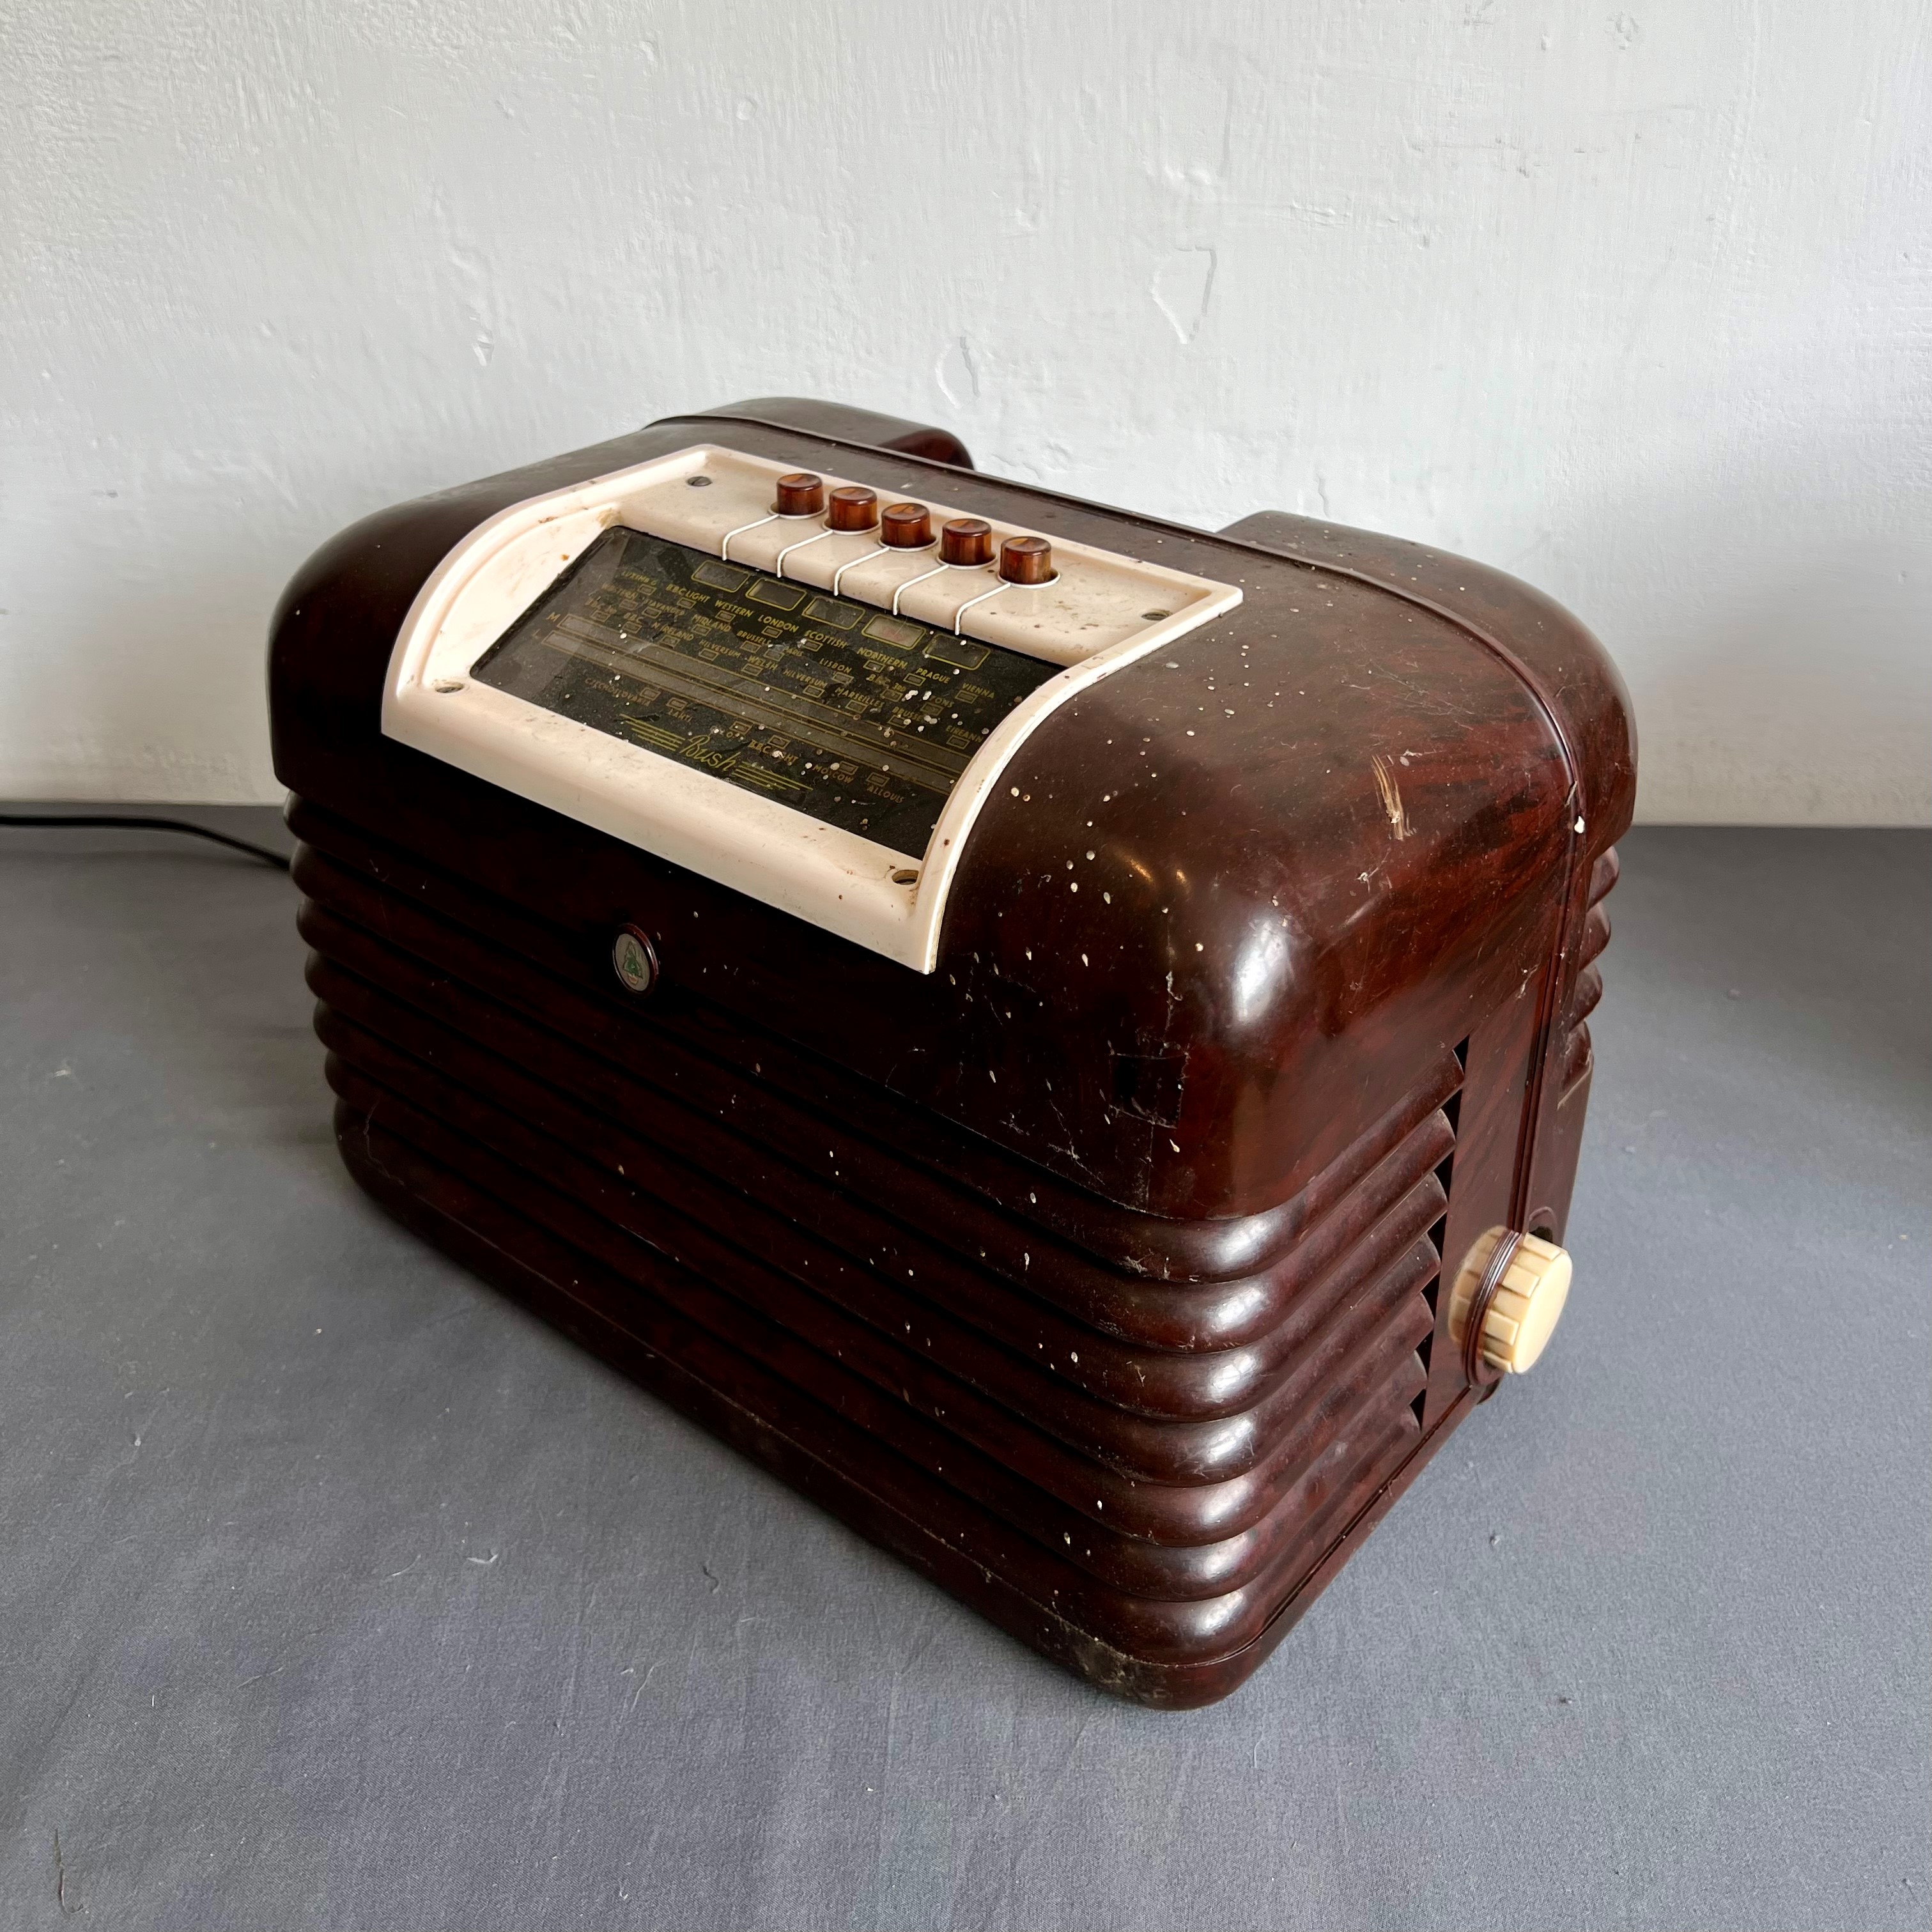 Two Bush bakelite radios - 1950s, comprising a DAC 90A and a DAC 10, both with brown bakelite cases, - Bild 5 aus 8